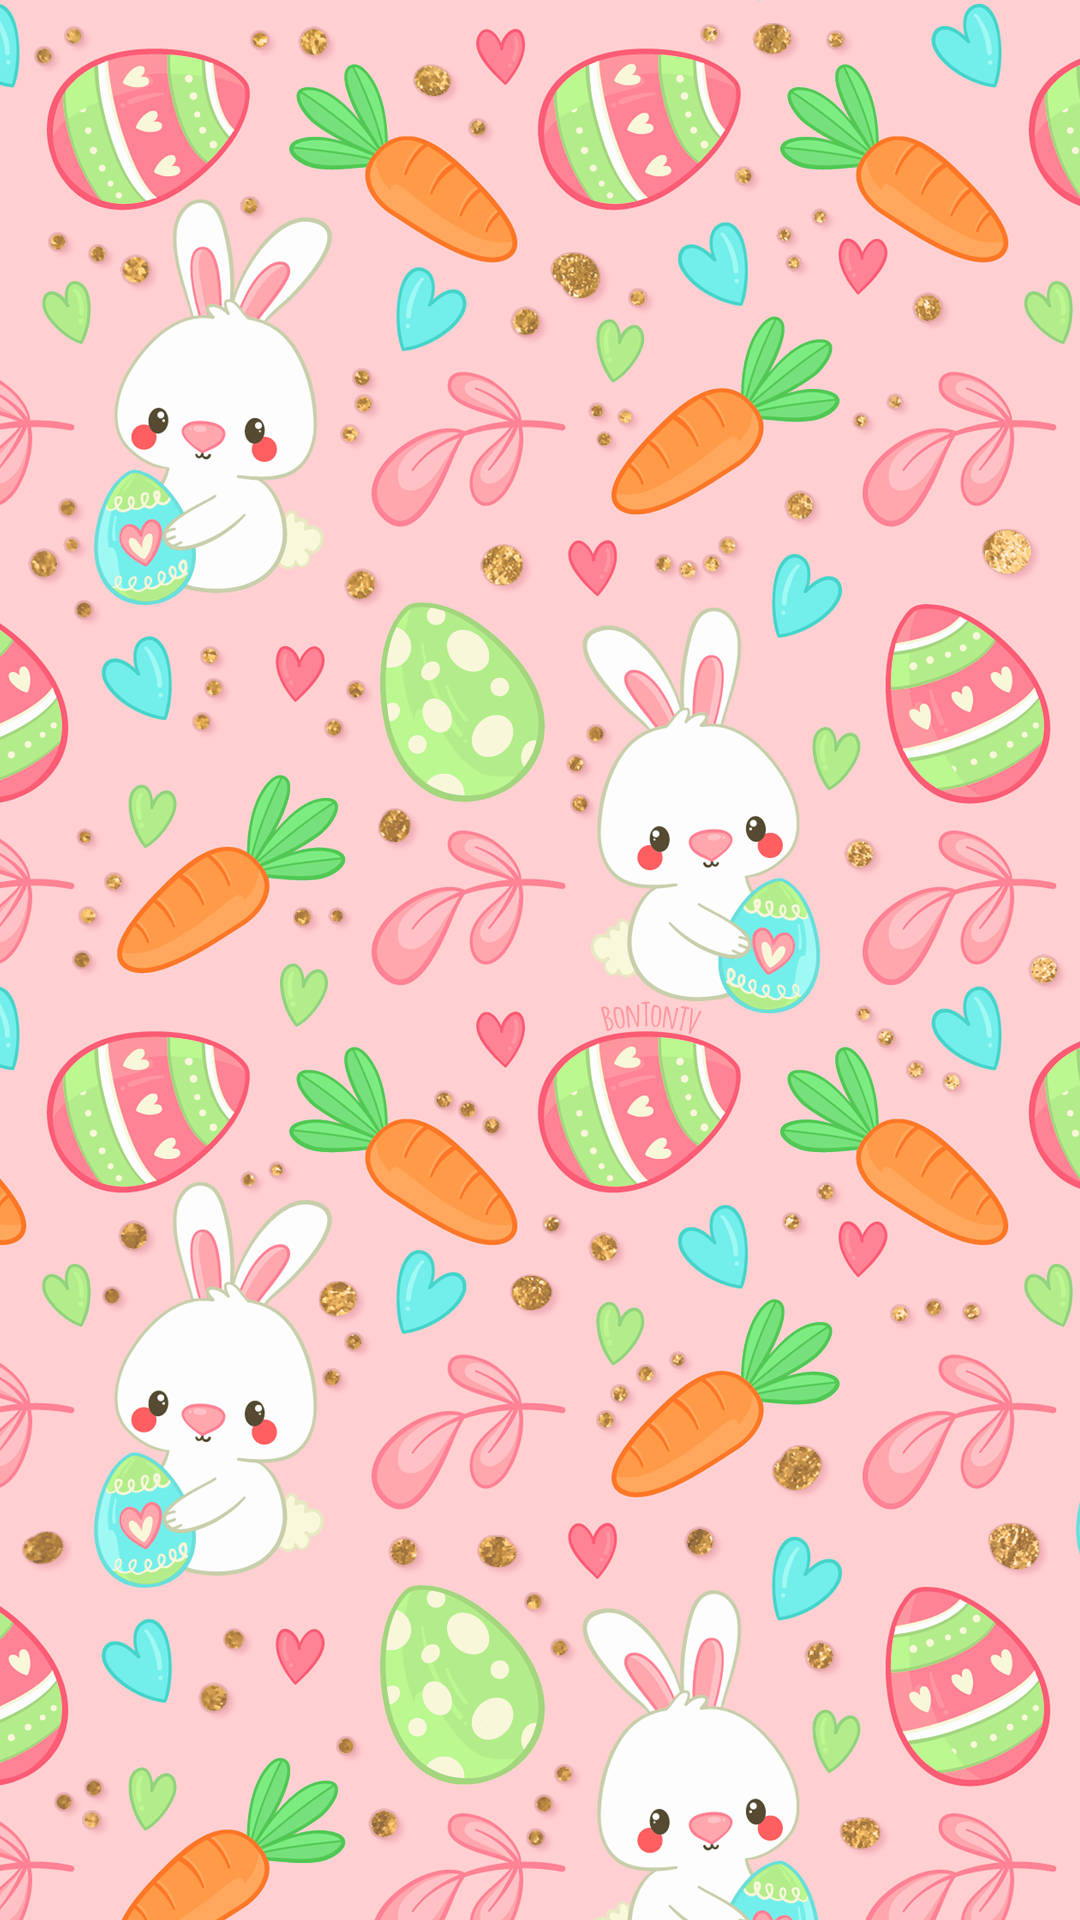 Get Ready For Easter With This Easter-themed Iphone! Background